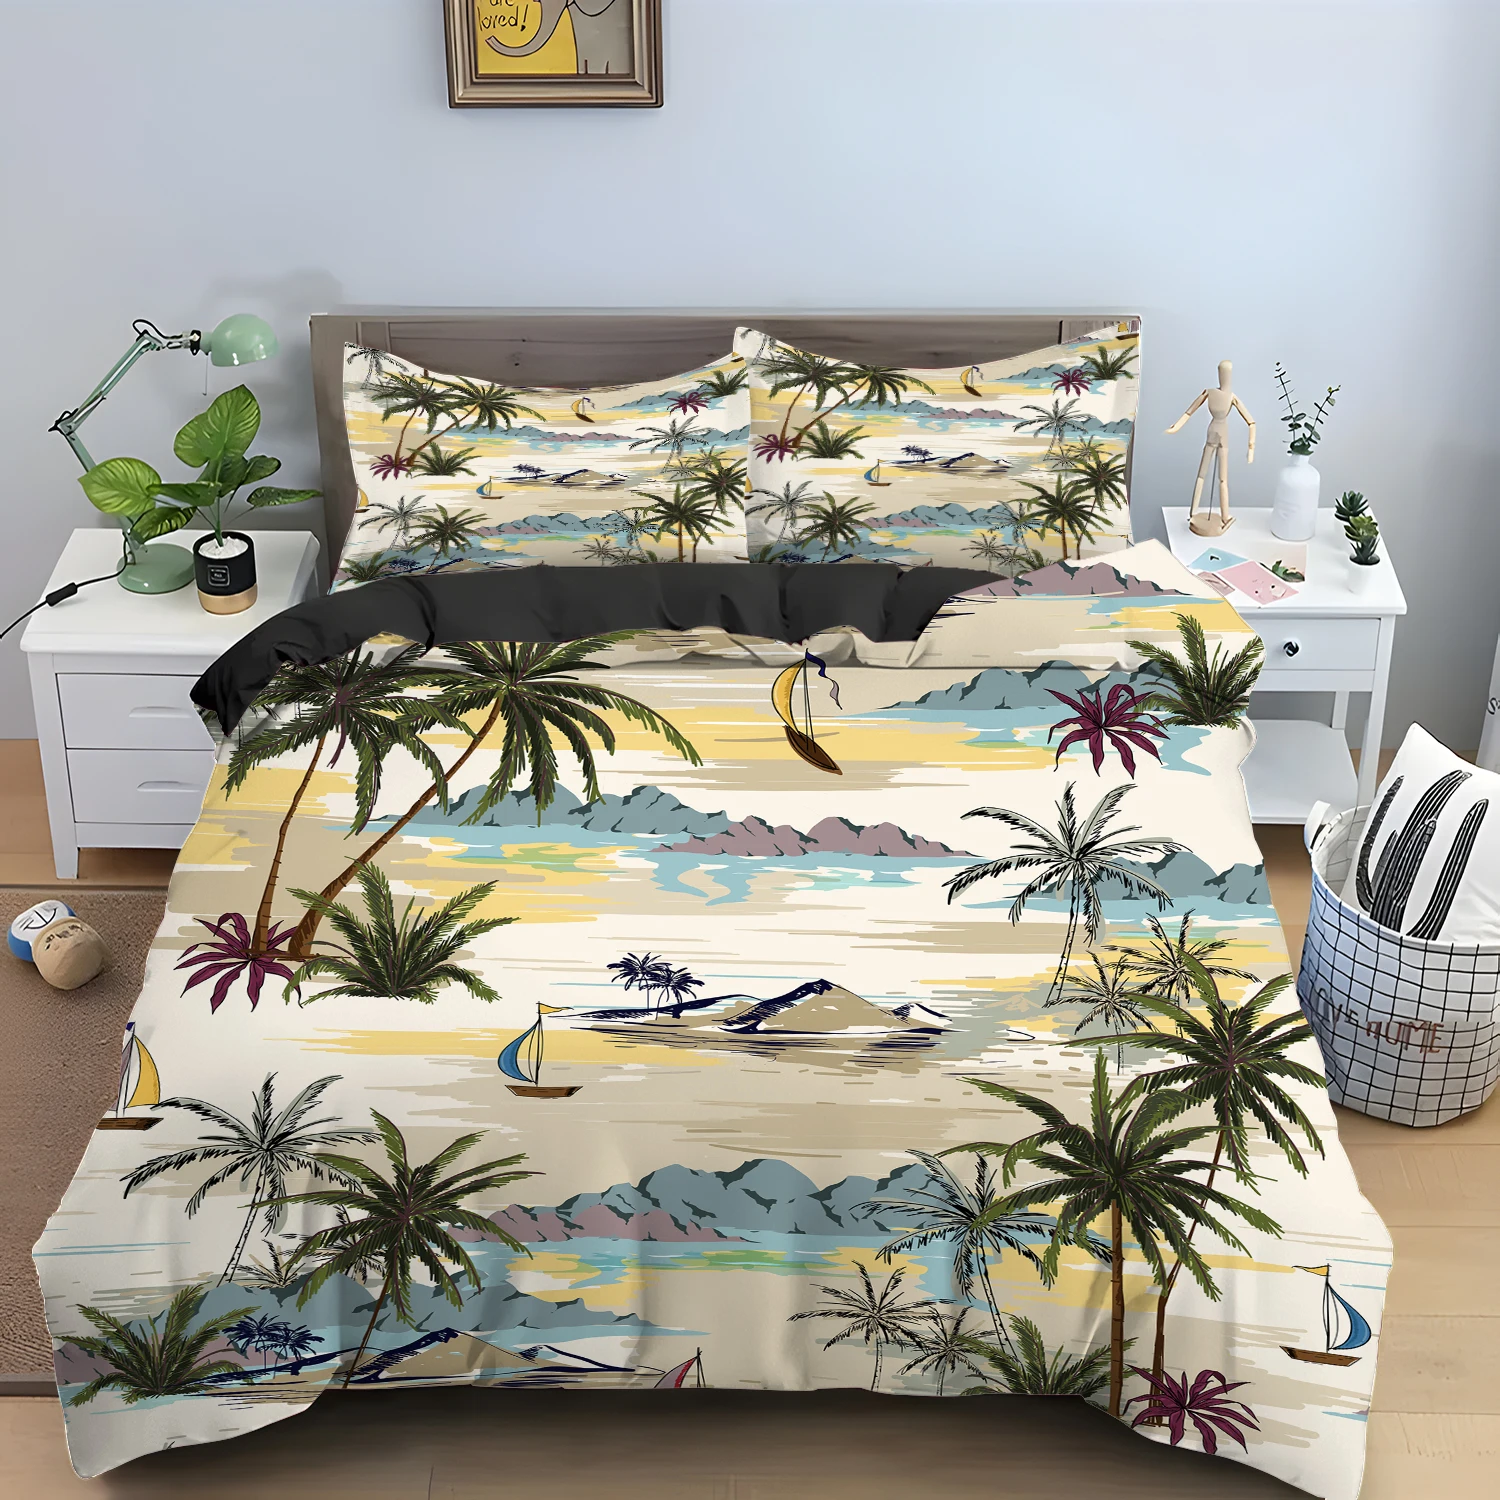 

Ocean Beach Coconut Forest King Queen Duvet Cover Seaside Scenery Bedding Set Hawaii Coast Comforter Cover Polyester Quilt Cover